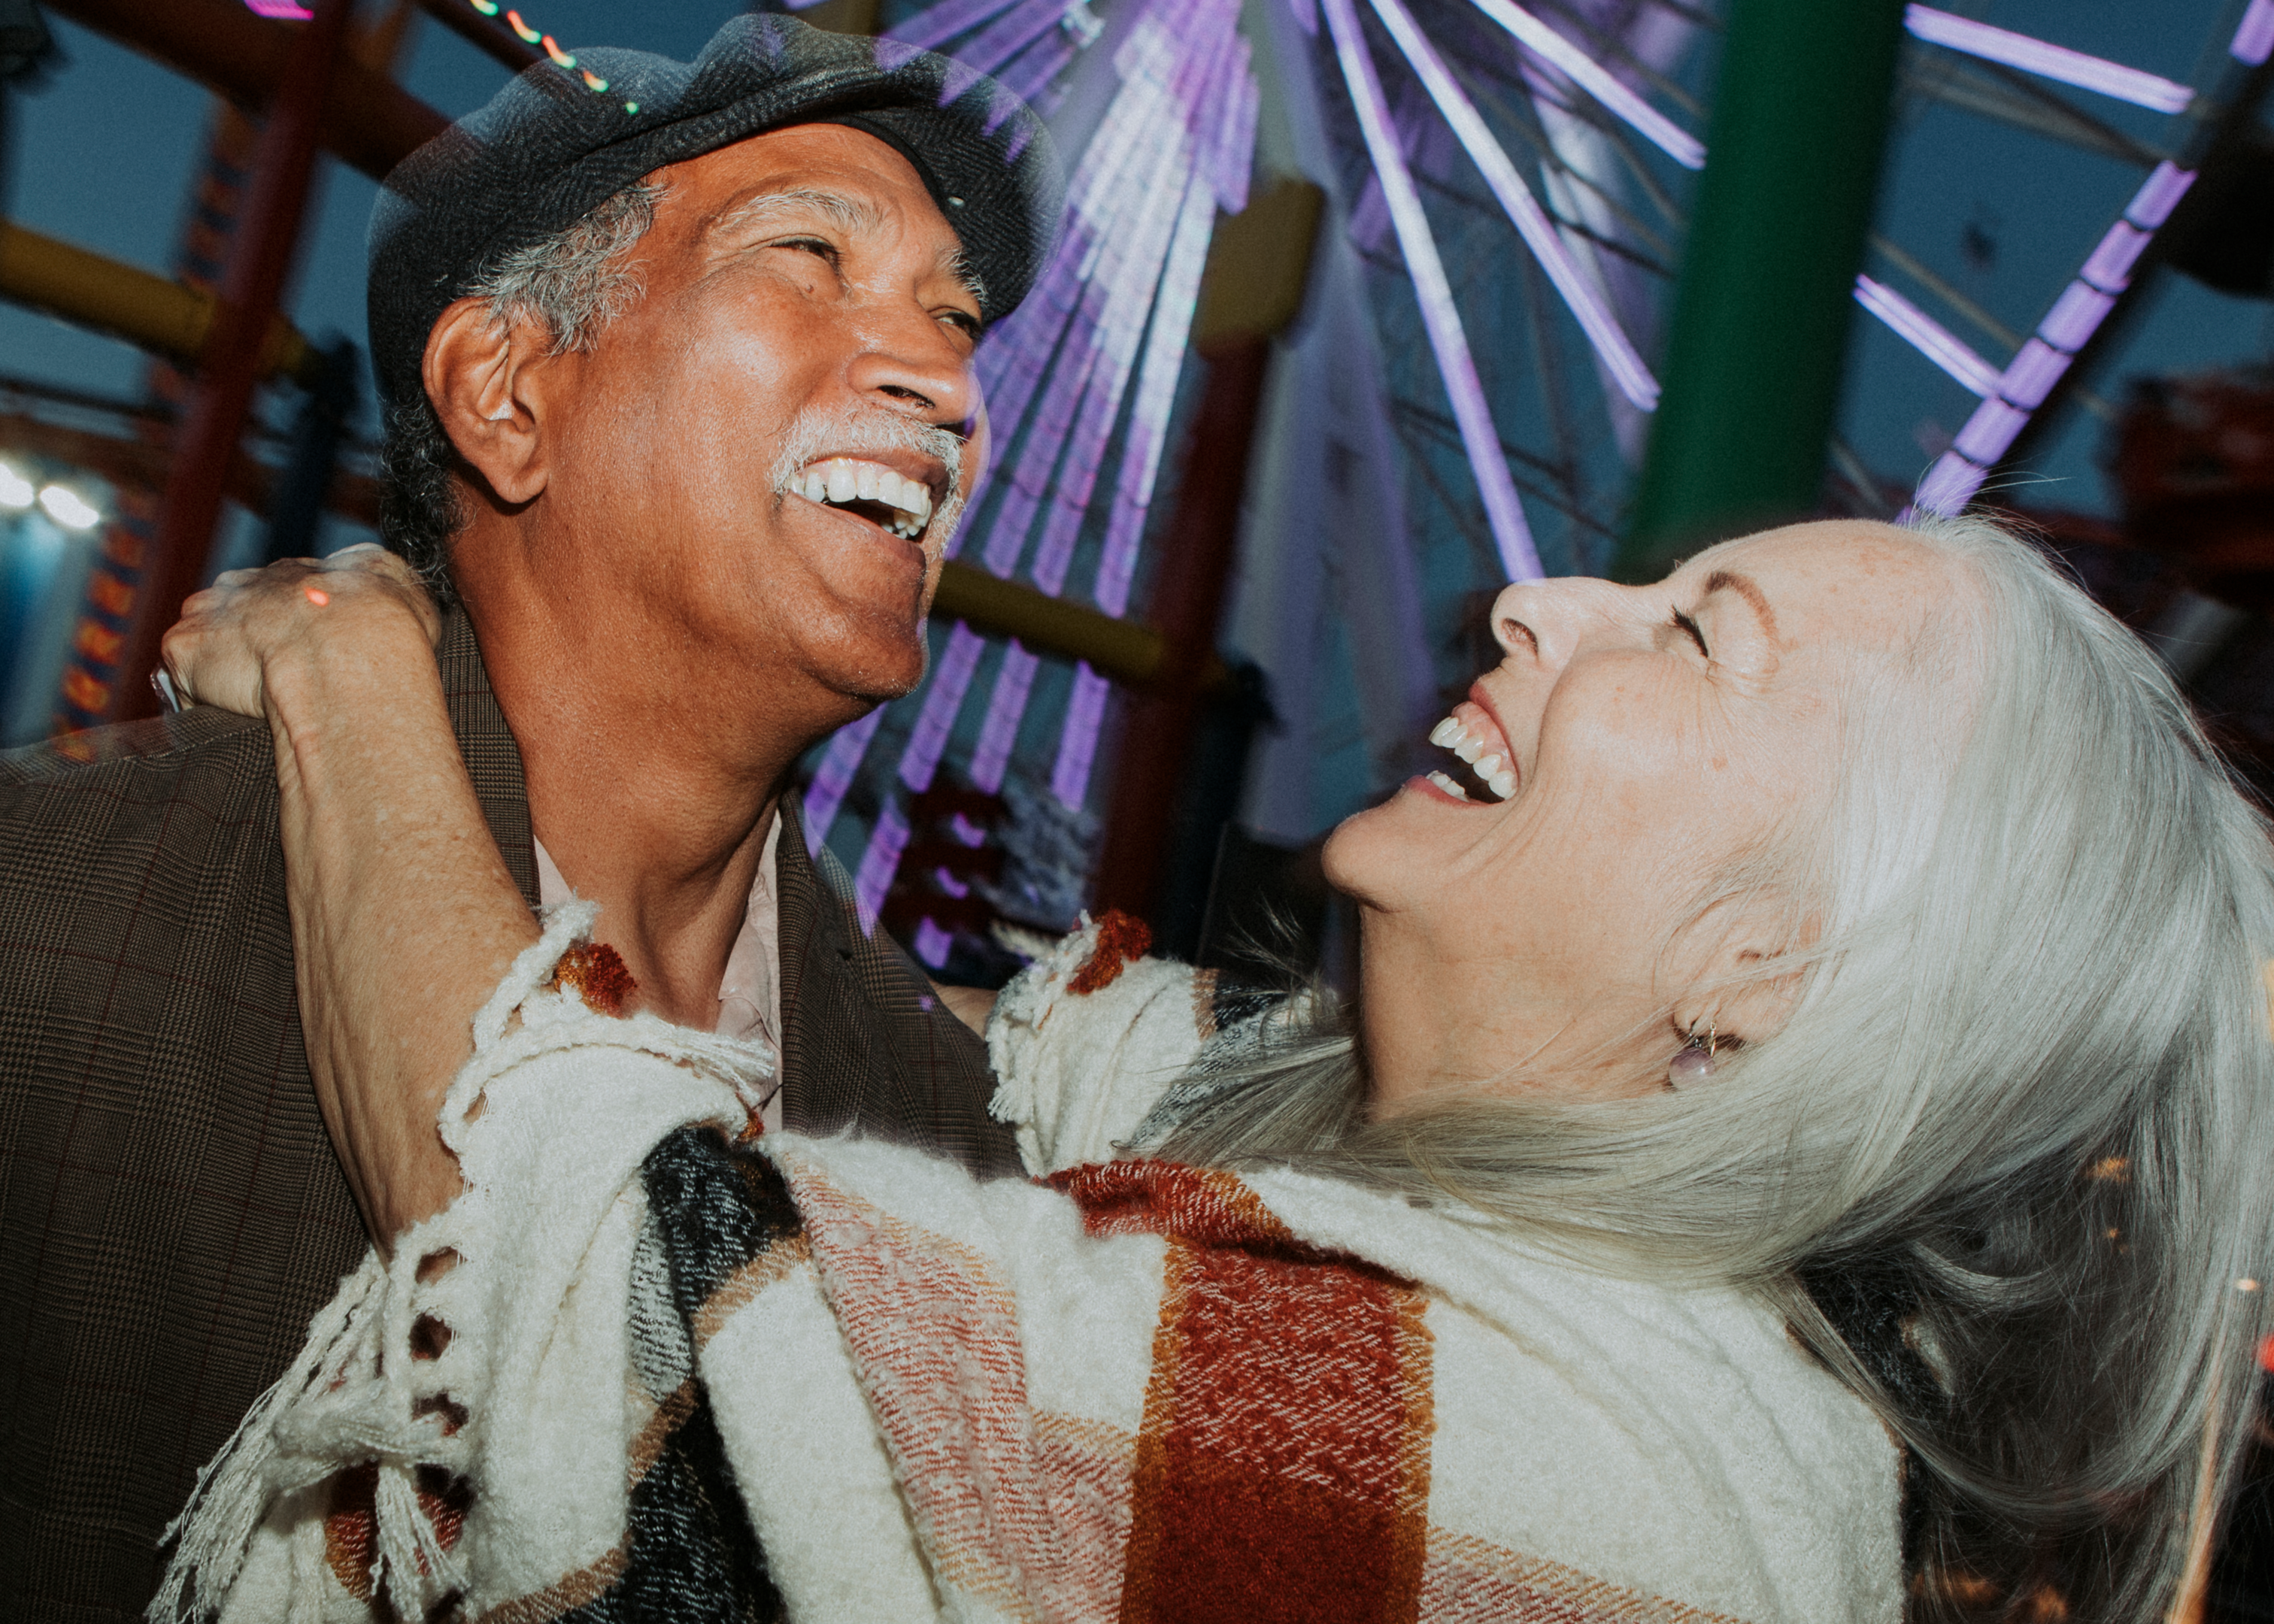 At Pacific Park in Santa Monica, a cheerful elderly couple embodies the spirit of common law marriage; their enduring love testament to the deep bonds formed through years of unwavering partnership, showcasing that true commitment goes beyond legal certificates in the golden state of California.